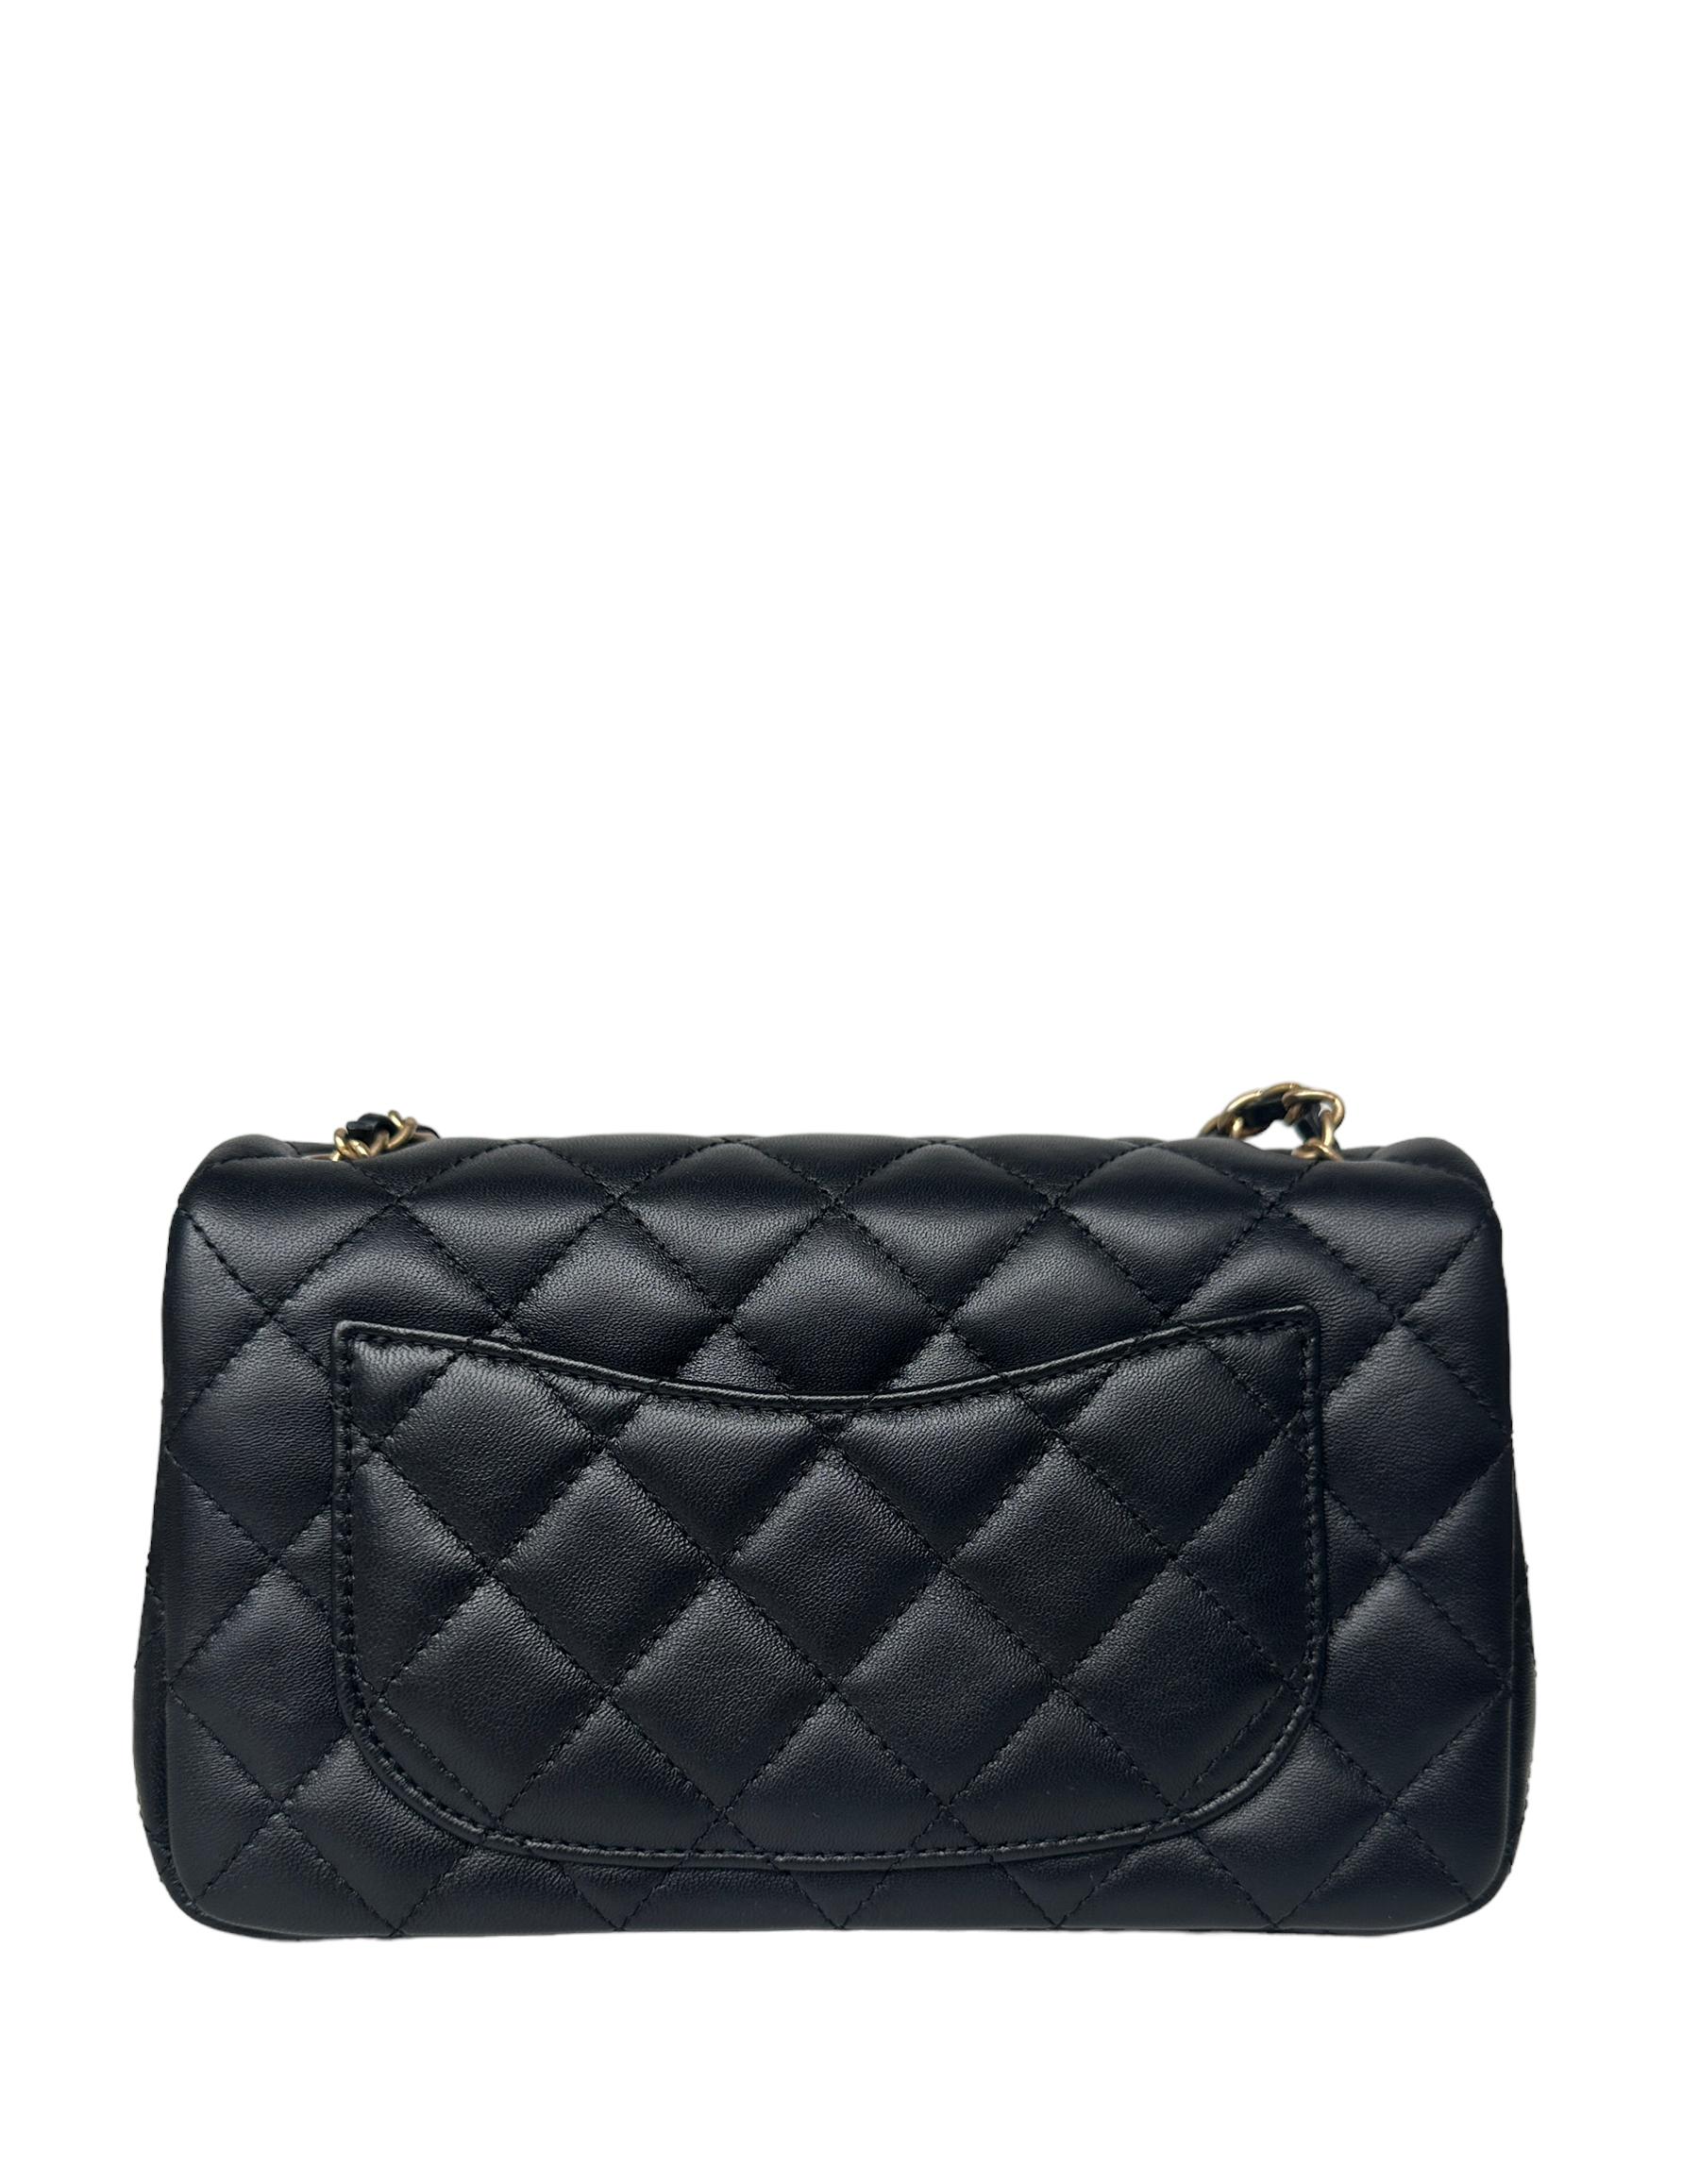 Chanel Black Lambskin Quilted Rectangular CC Pearl Crush Mini Flap Bag

Made In: Italy
Year of Production: 2023
Color: Black
Hardware: Goldtone
Materials: Lambskin leather
Lining: Smooth leather
Closure/Opening: Flap top with CC twist lock
Exterior